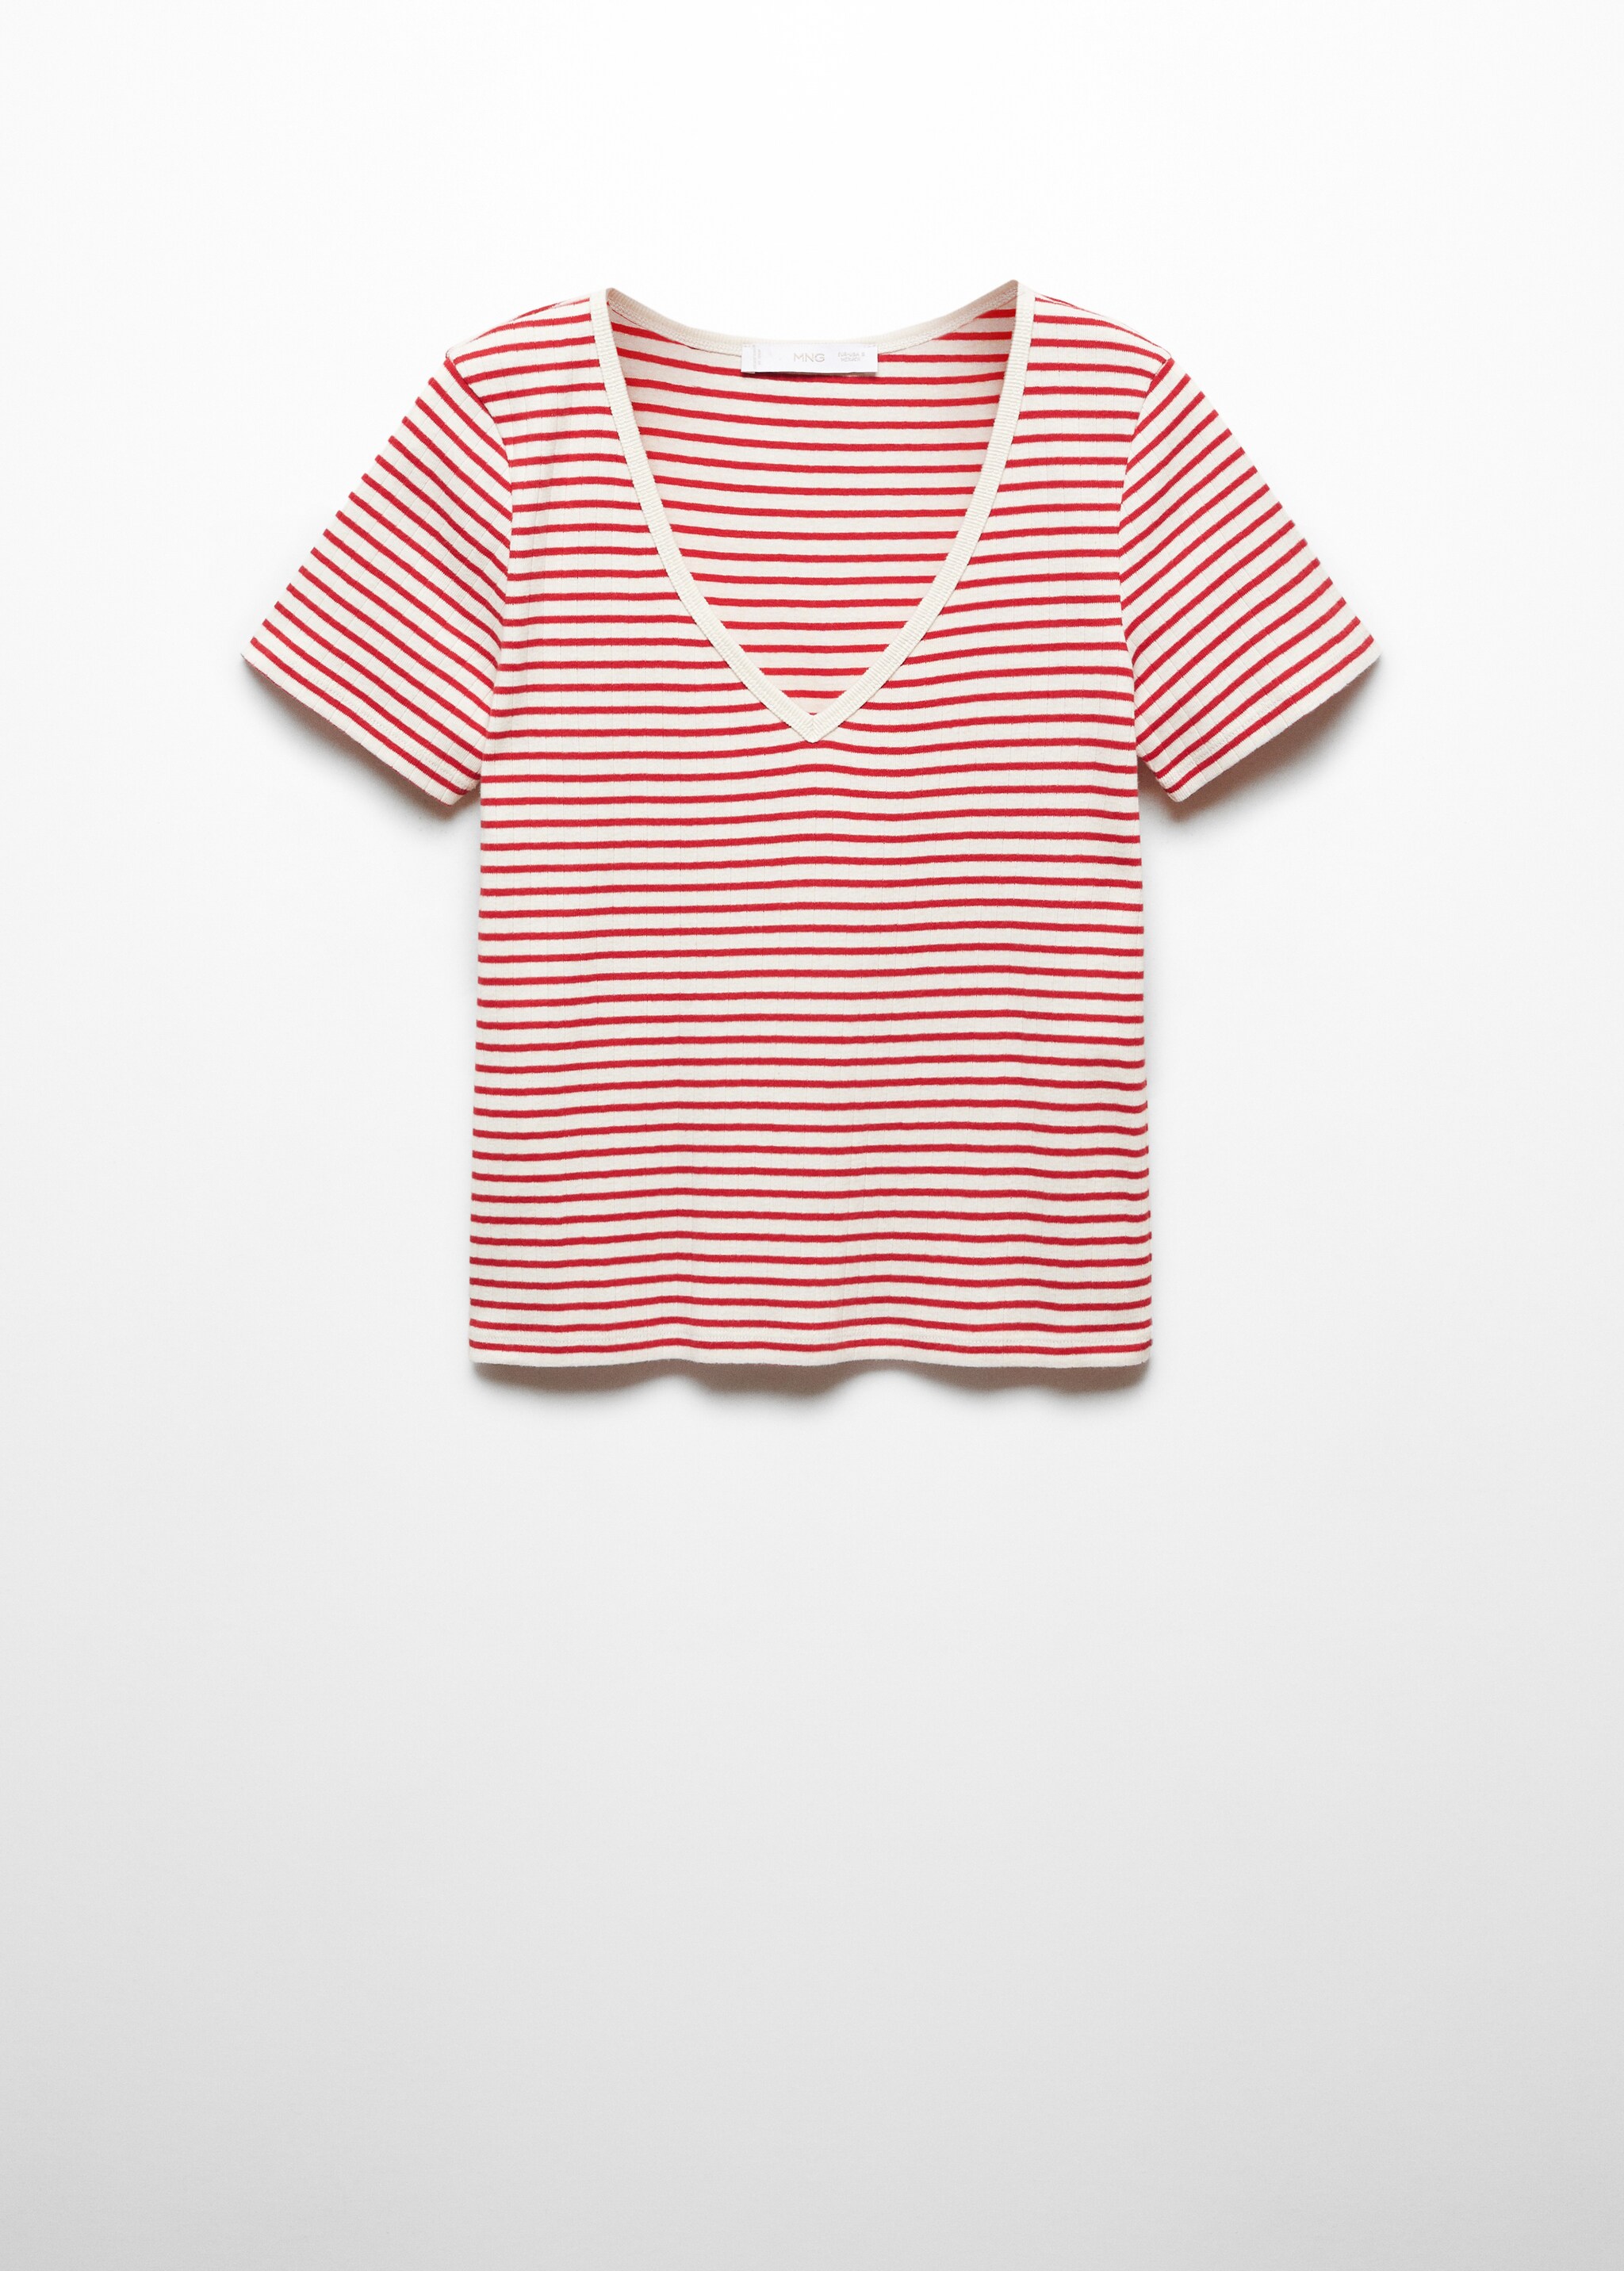 V-neck striped T-shirt - Article without model